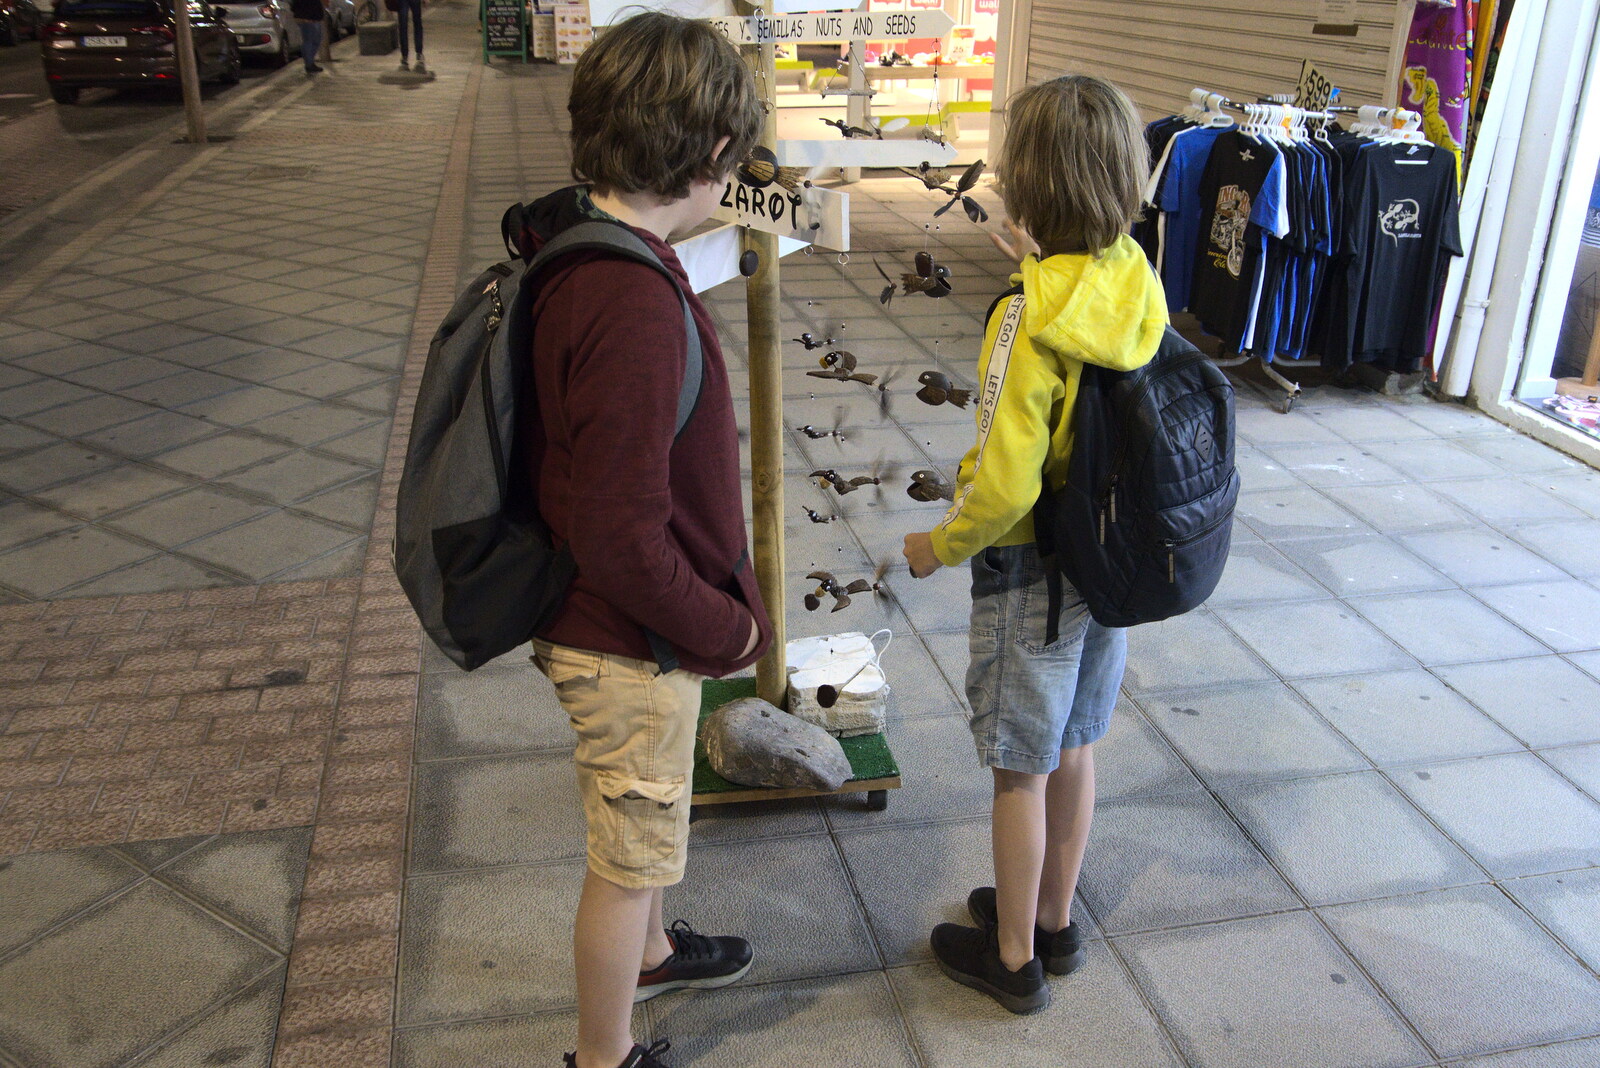 Fred and Harry look at flying models from Five Days in Lanzarote, Canary Islands, Spain - 24th October 2021